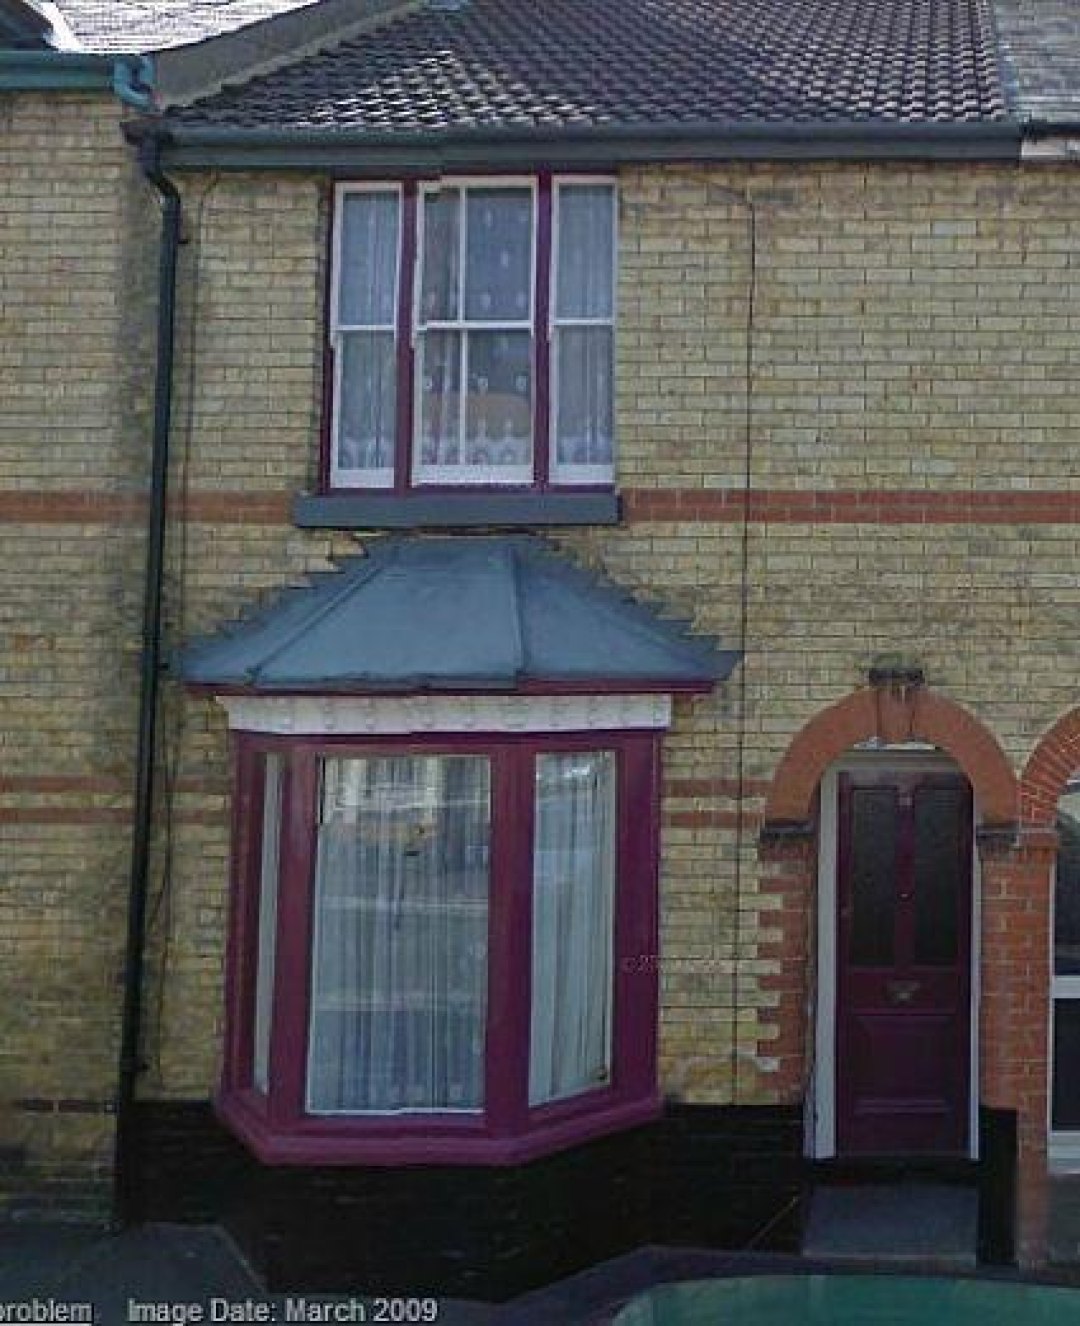 3 Bedroom Houses To Let In Guildford Primelocation